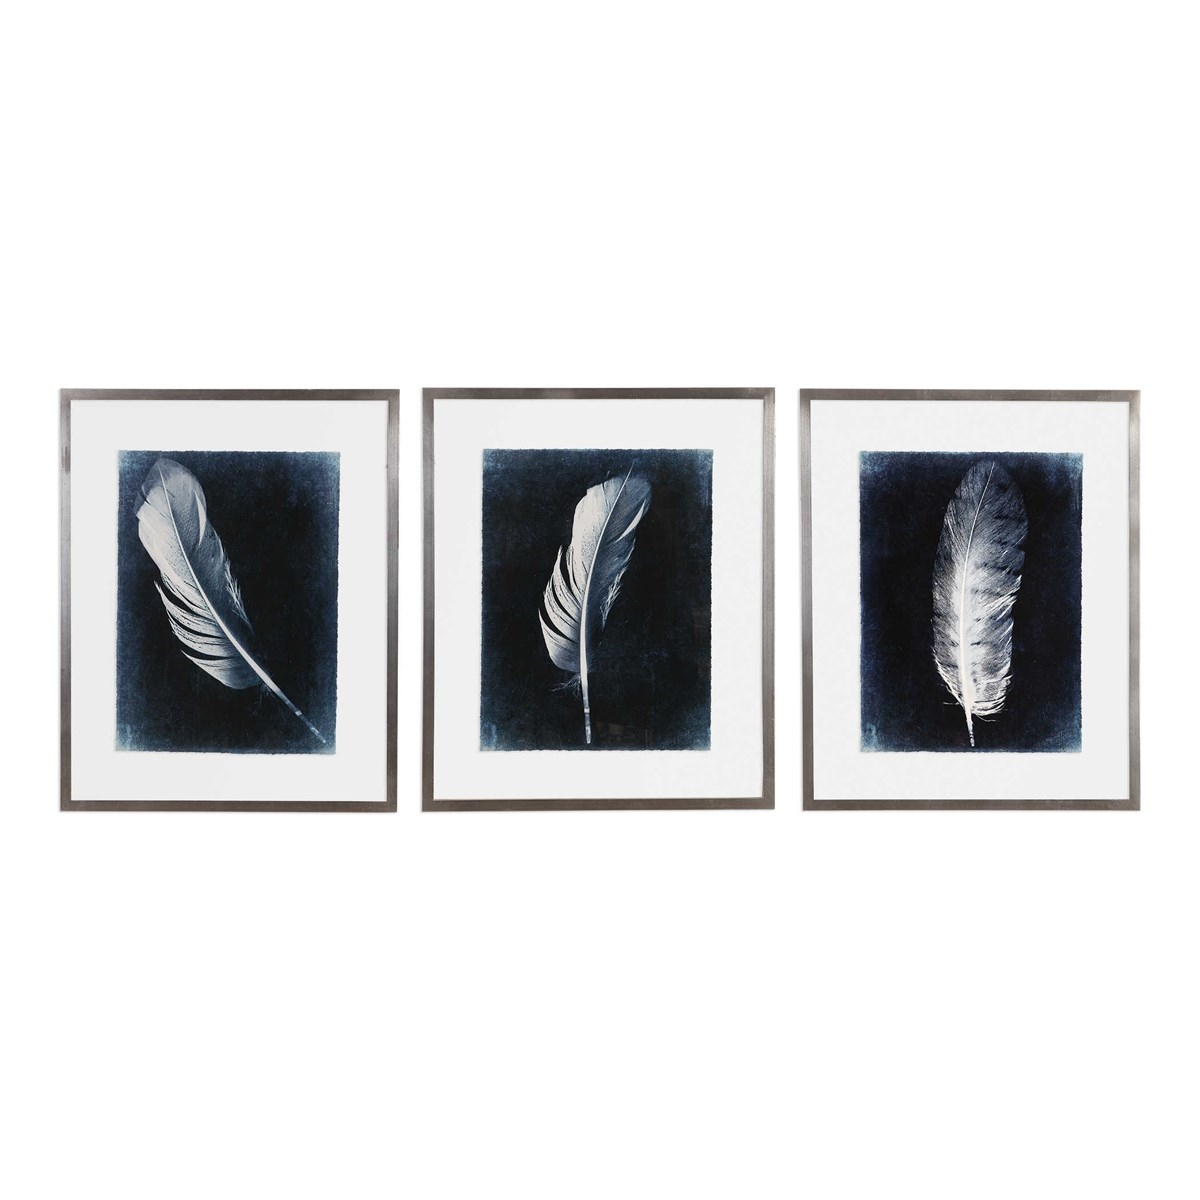 INVERTED FEATHERS FRAMED PRINTS, S/3 - Image 0